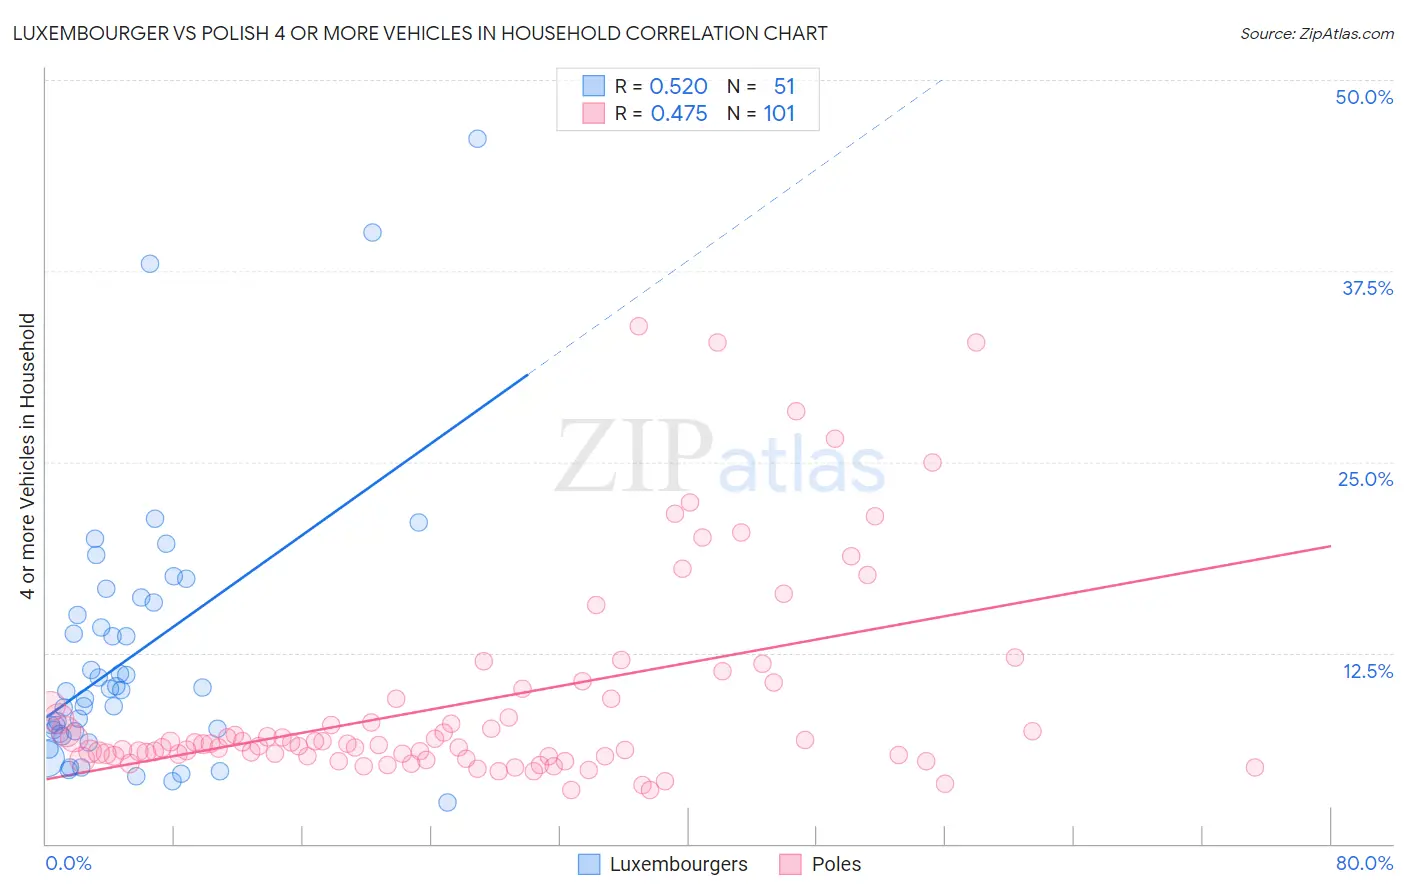 Luxembourger vs Polish 4 or more Vehicles in Household